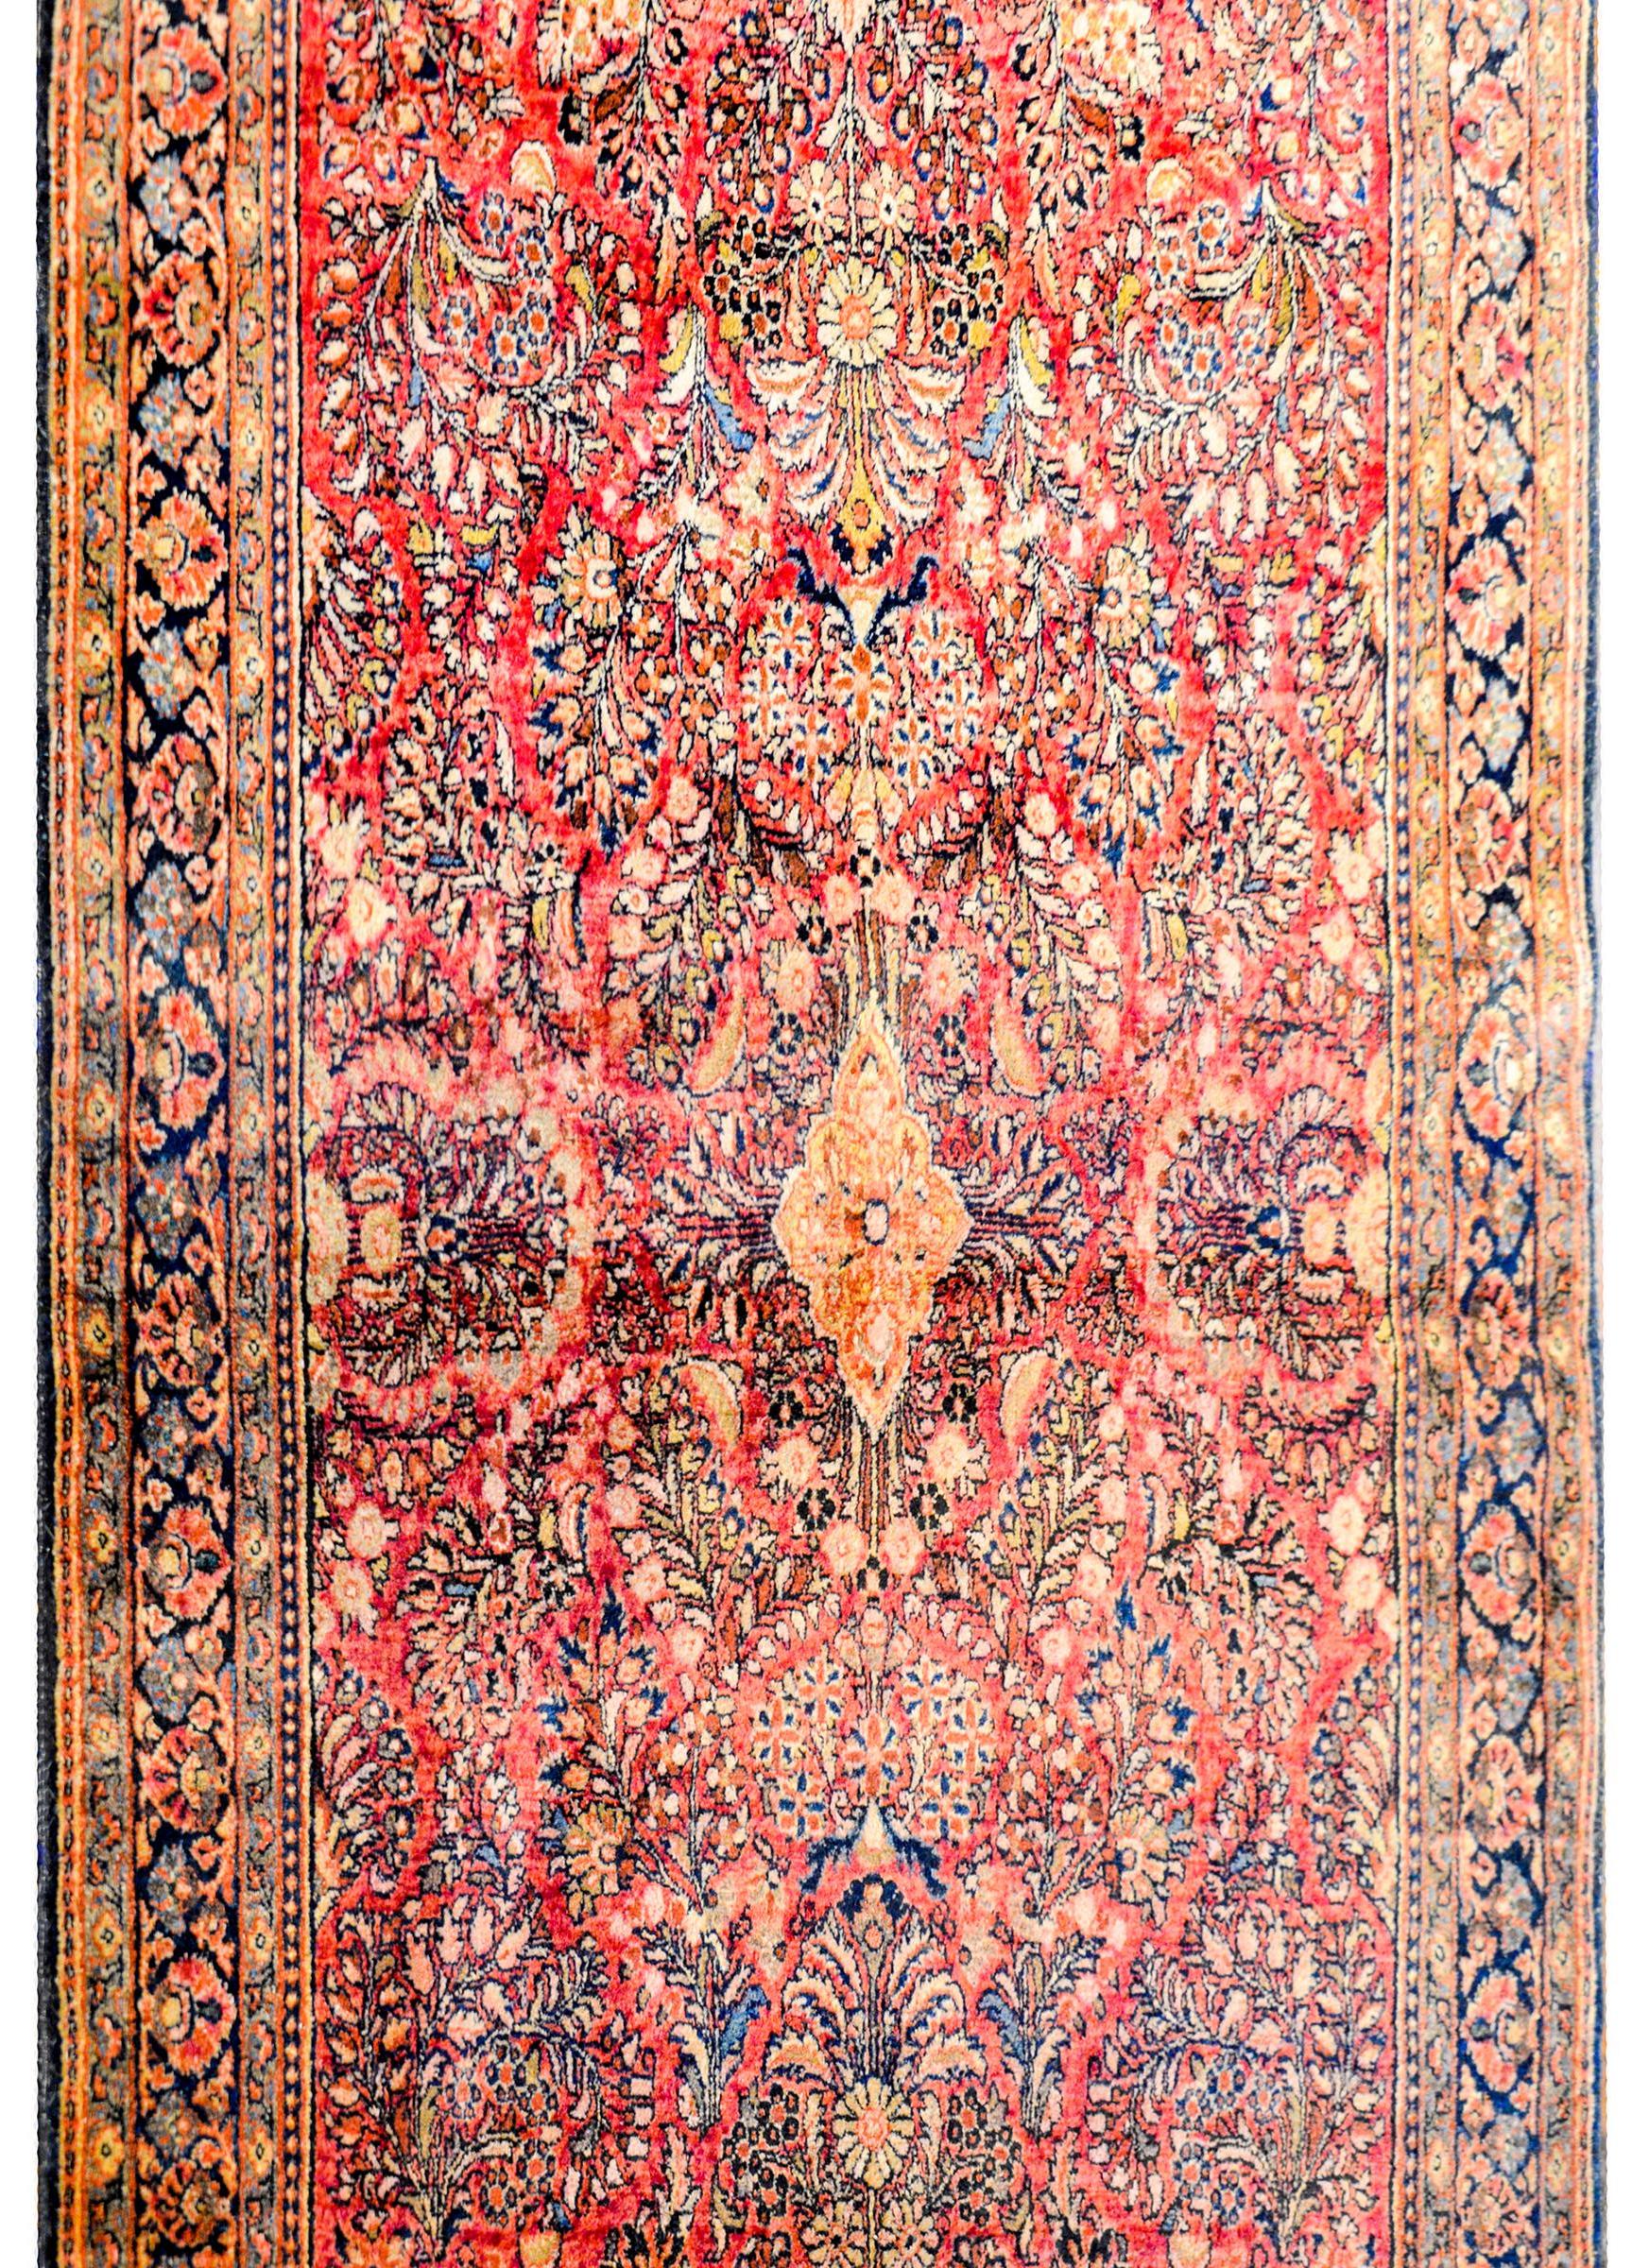 A gorgeous early 20th century Persian Sarouk rug with a wonderful central floral medallion amidst a field of myriad flowers and leaves, all woven in light and dark indigo, cream, and cranberry colored background. The border is complementary woven